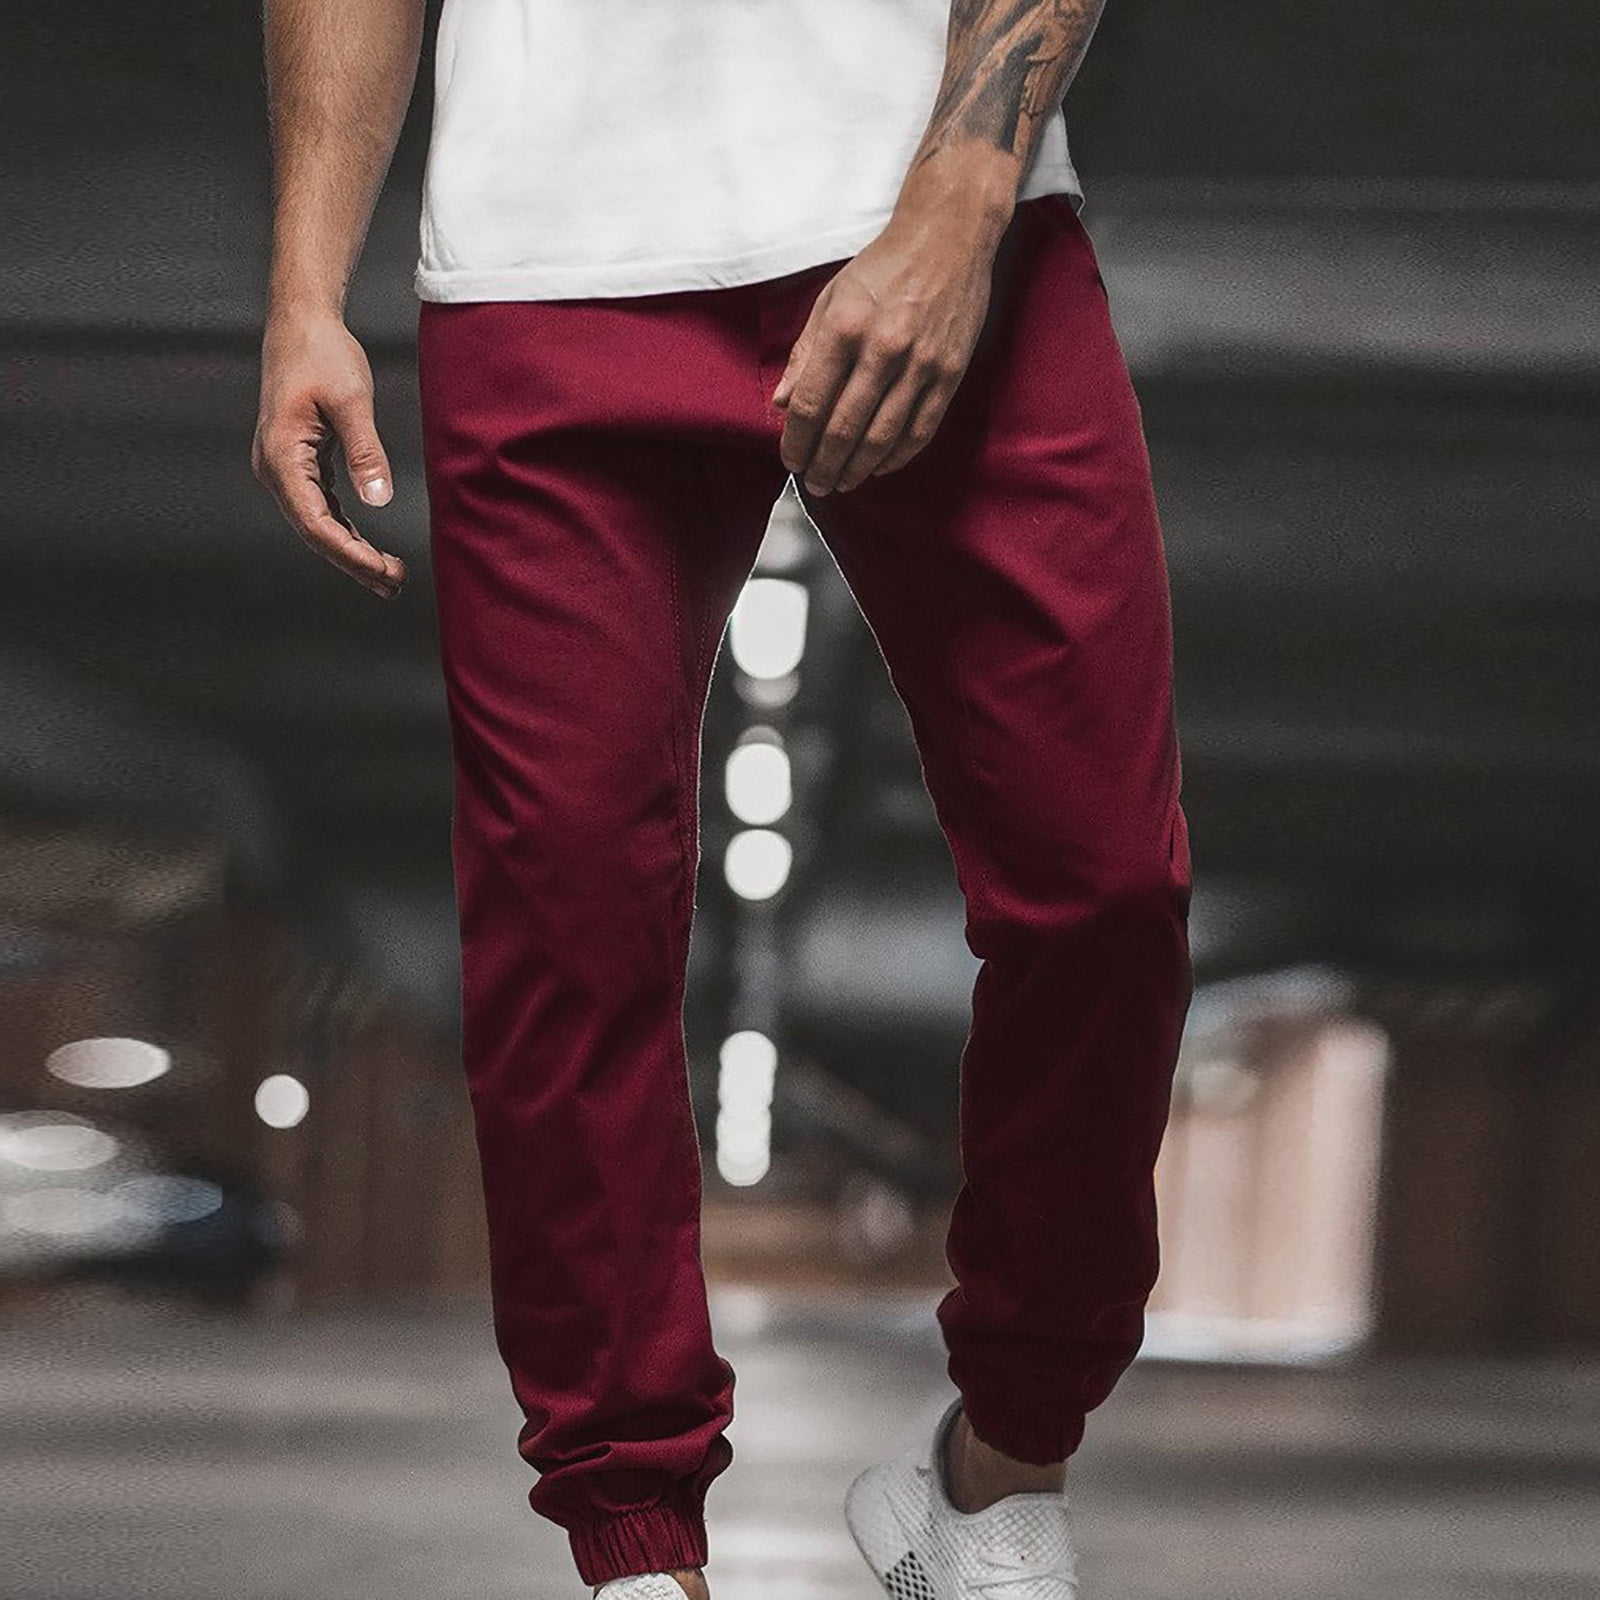 Men's Solid Color Sports Pants Fashion Slim Pockets Workout Athletic  Trousers Casual Running Joggers Sweatpants 